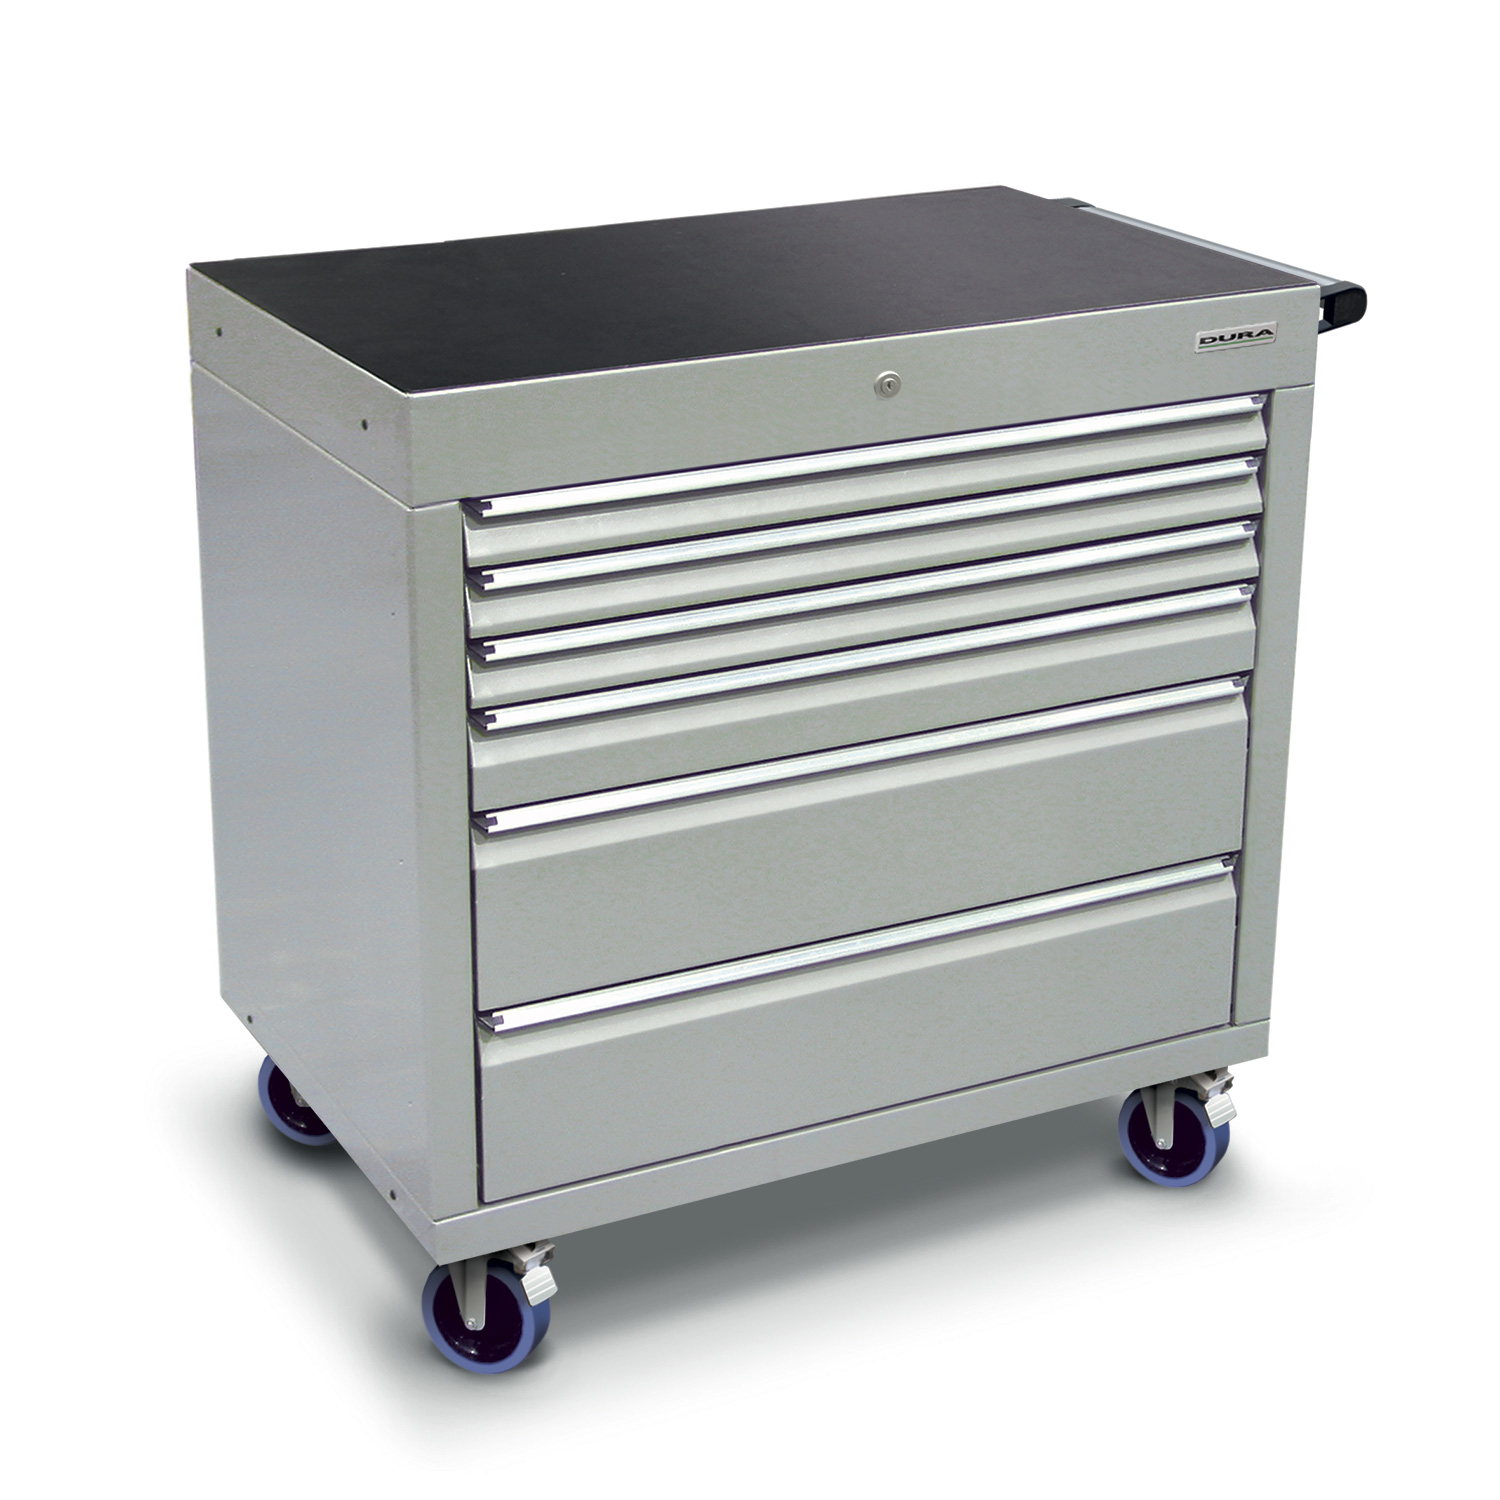 900 series cabinet with 6 drawers (3 slim, 1 medium, 2 large) and castors